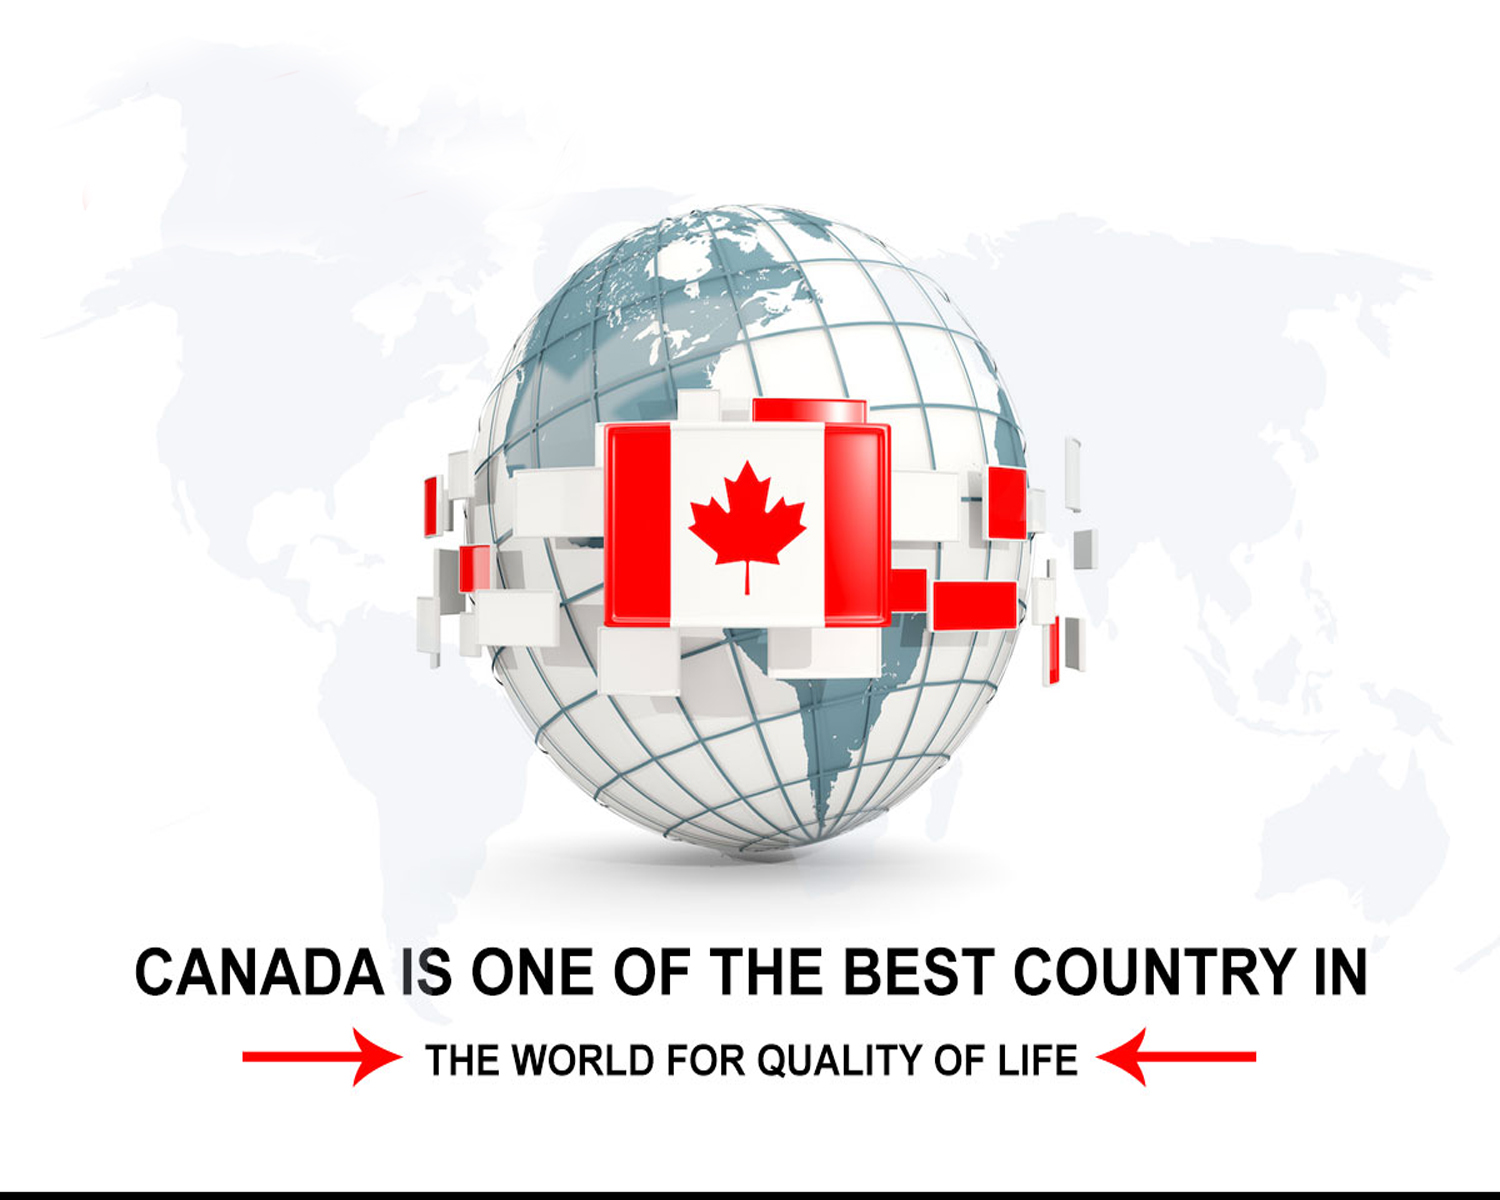 Job Opportunities in the Canadian Provinces